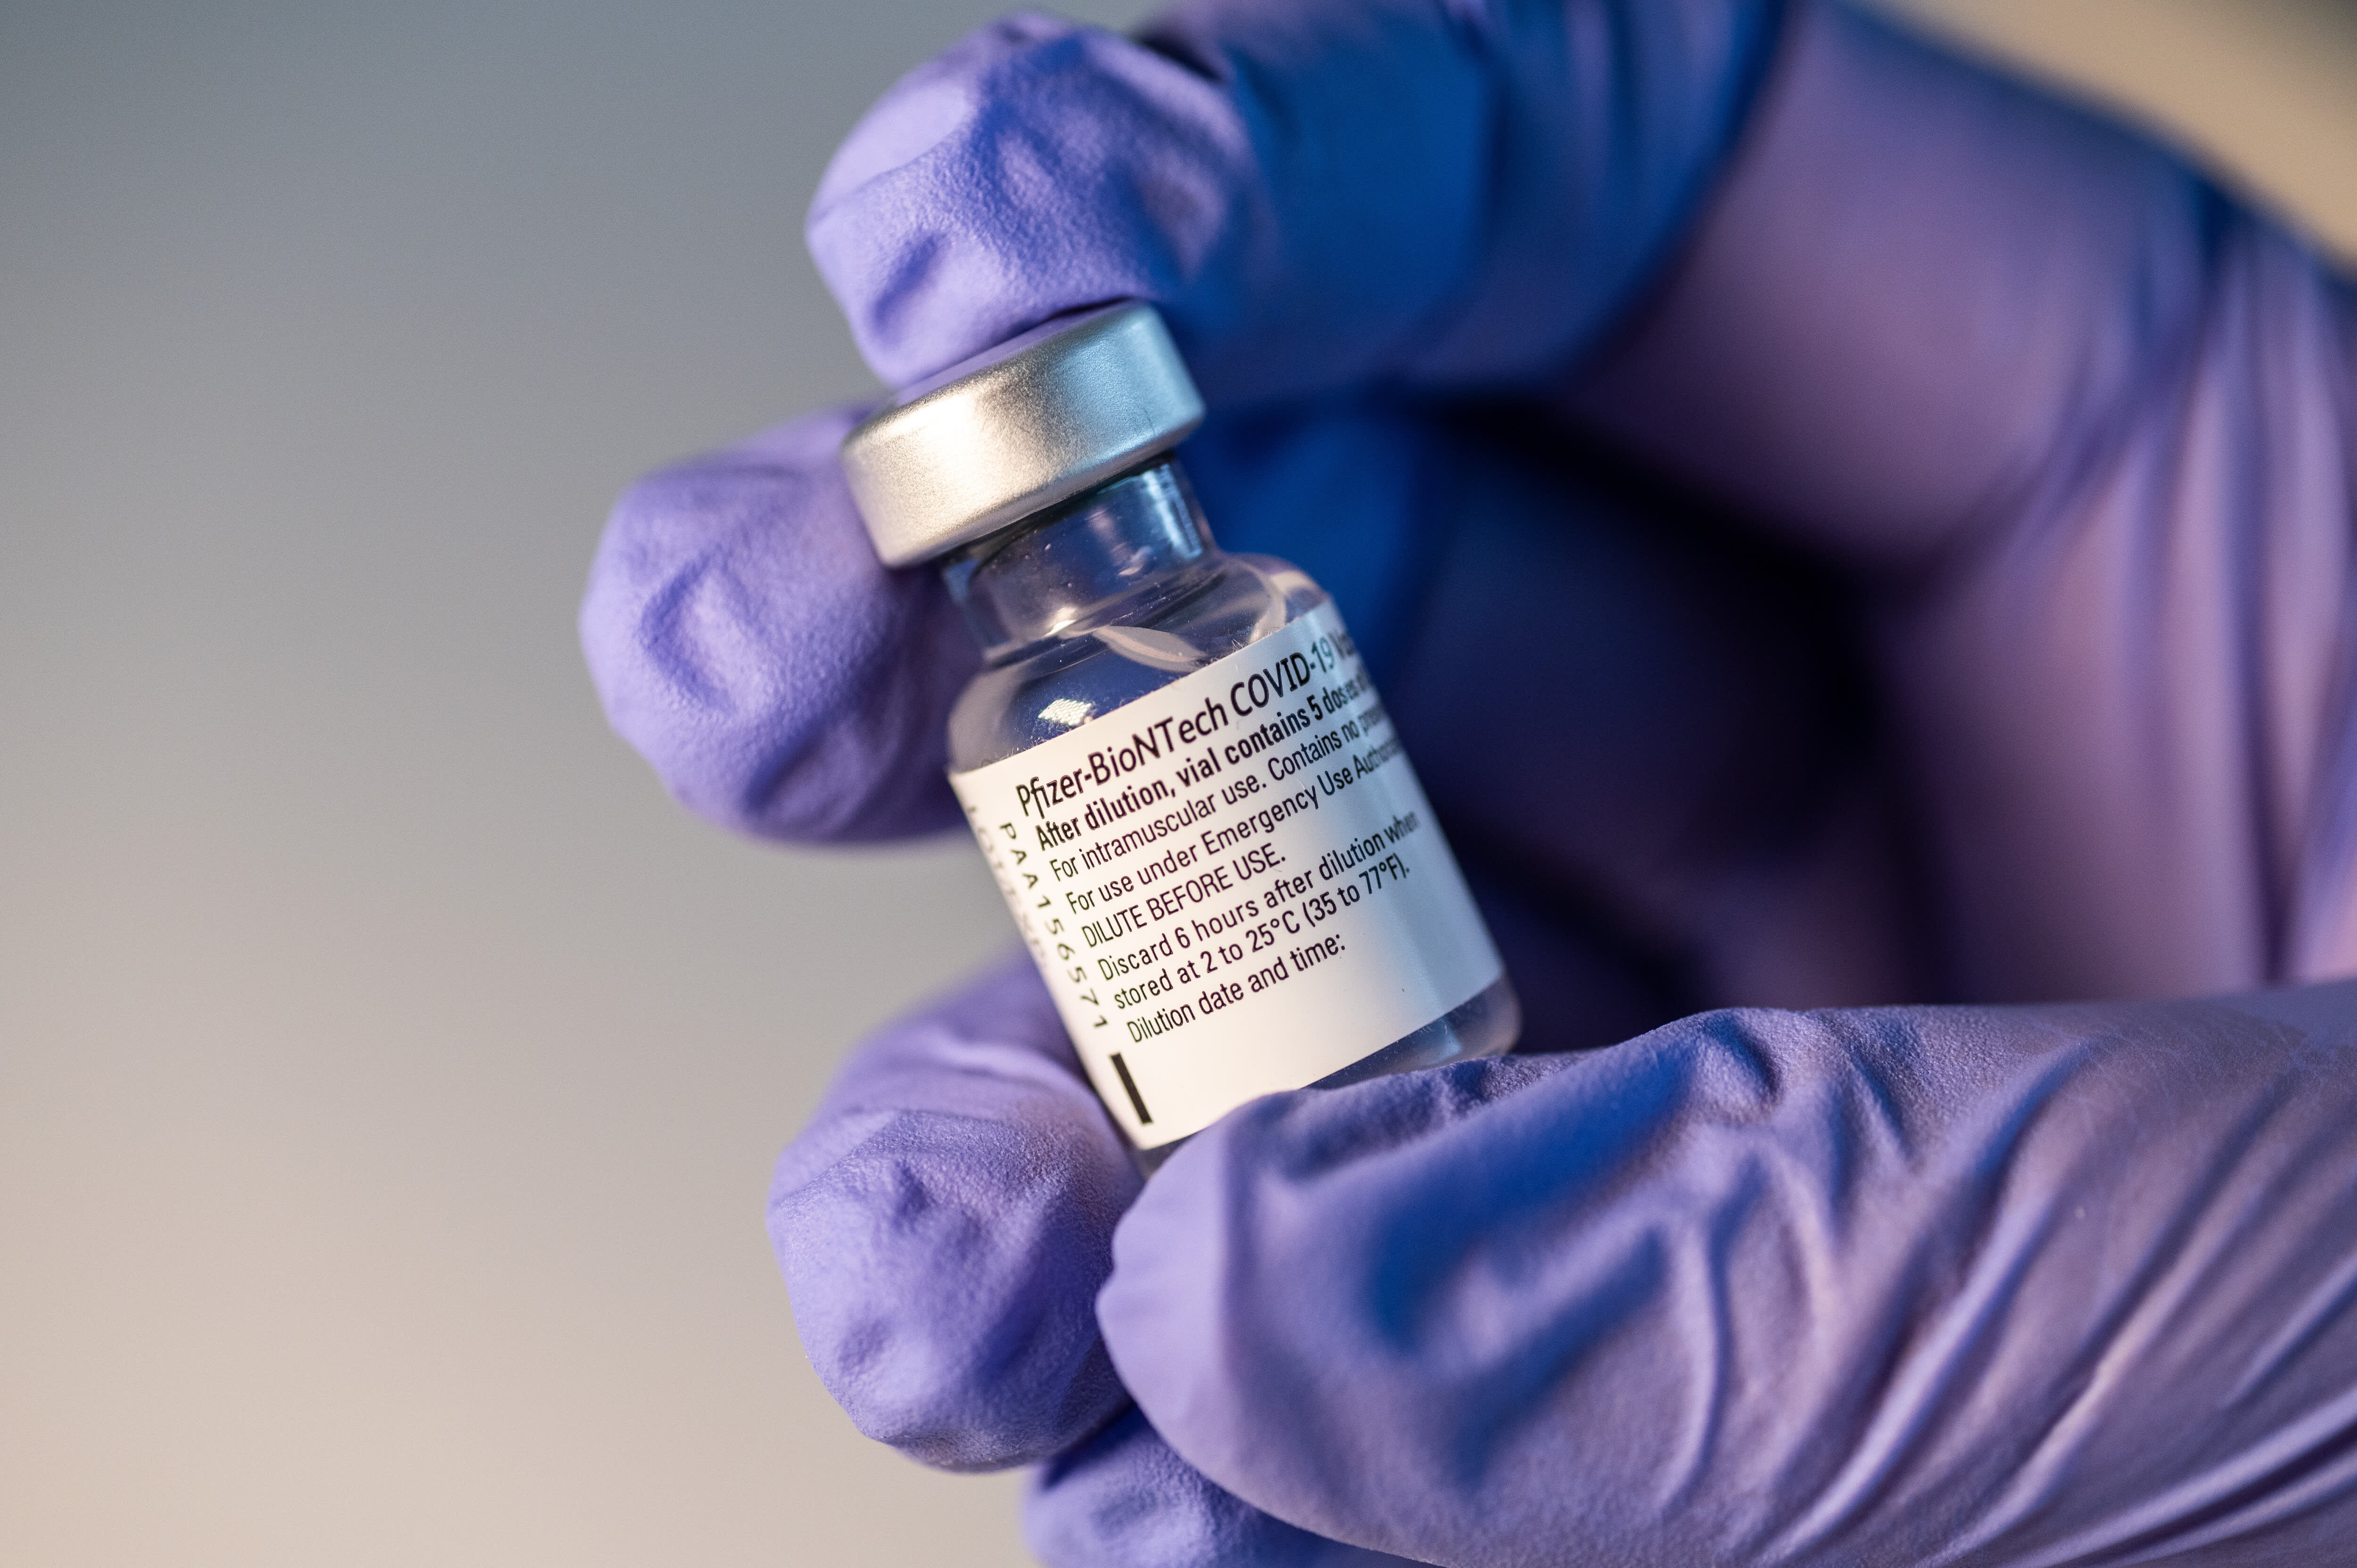 Vaccine makers move quickly against new omicron Covid variant, testing already under way